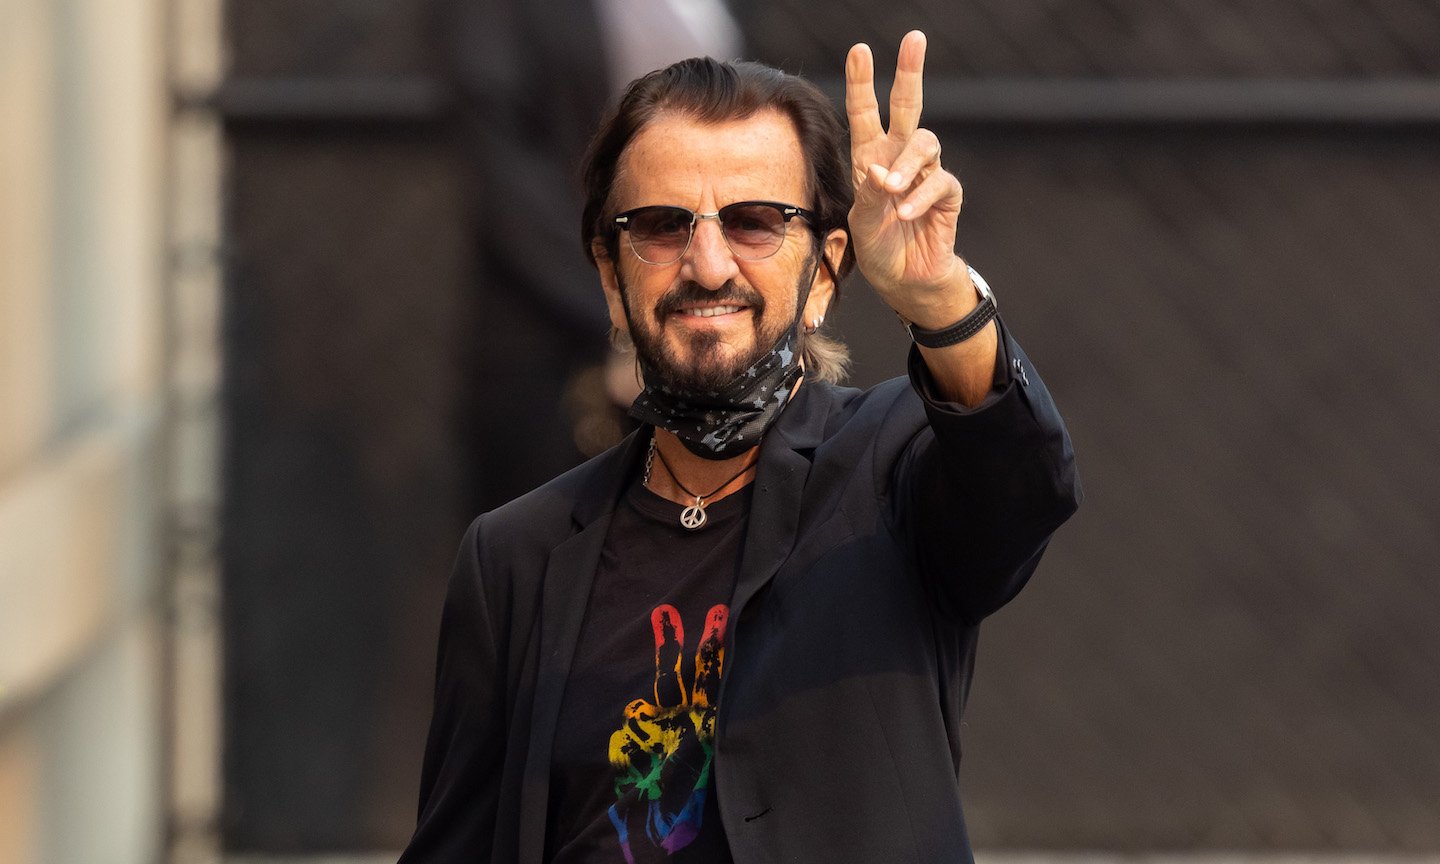 Watch Ringo Starr Lead Over 100 Drummers In Cover Of ‘Come Together’ For World Hunger Campaign